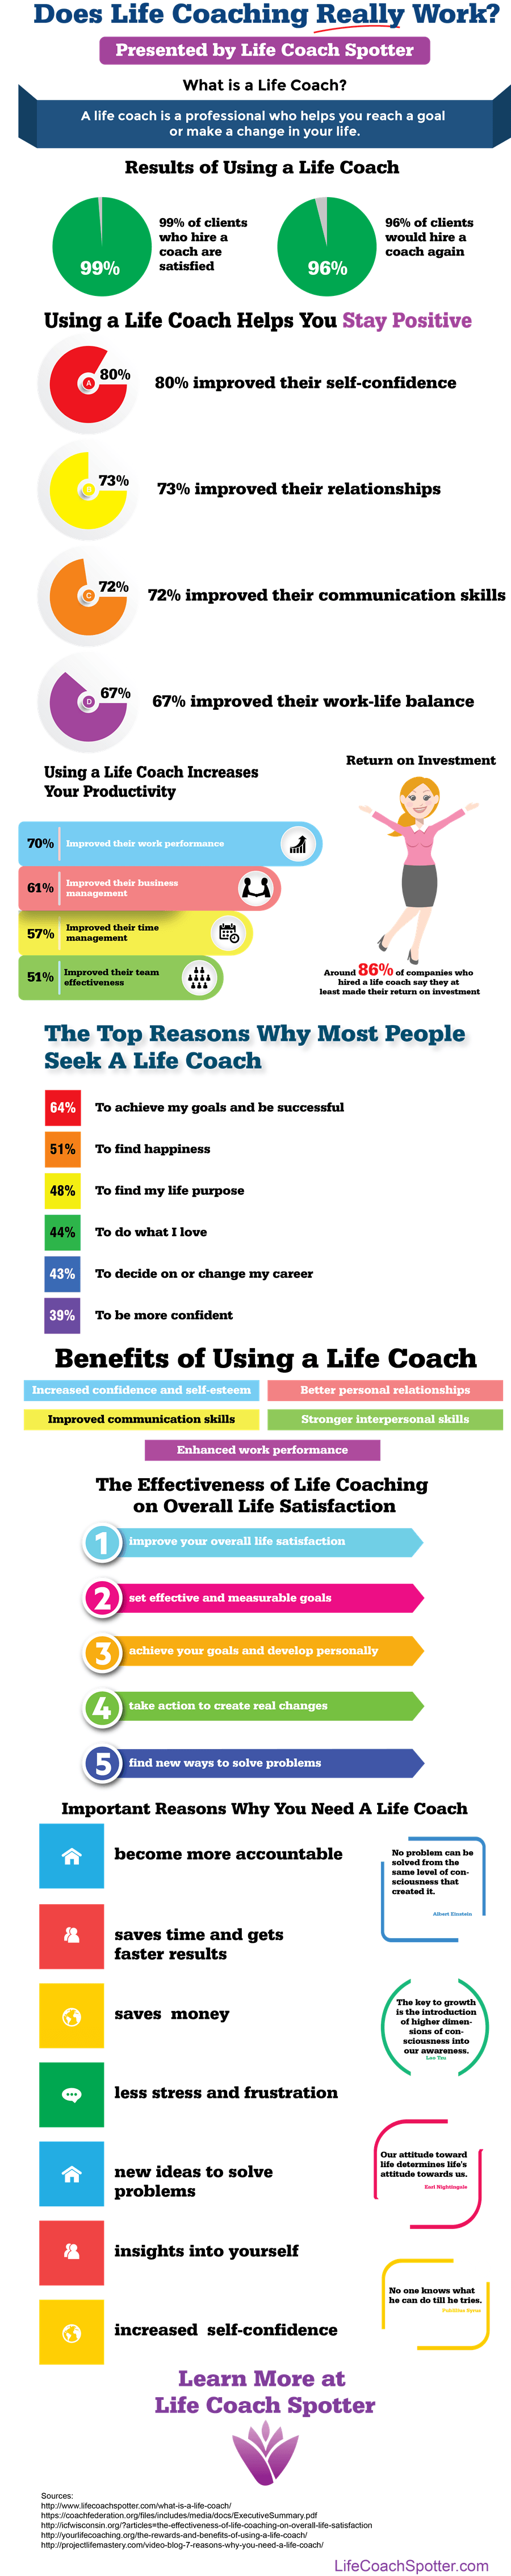 Does Life Coaching Really Work? Infographic